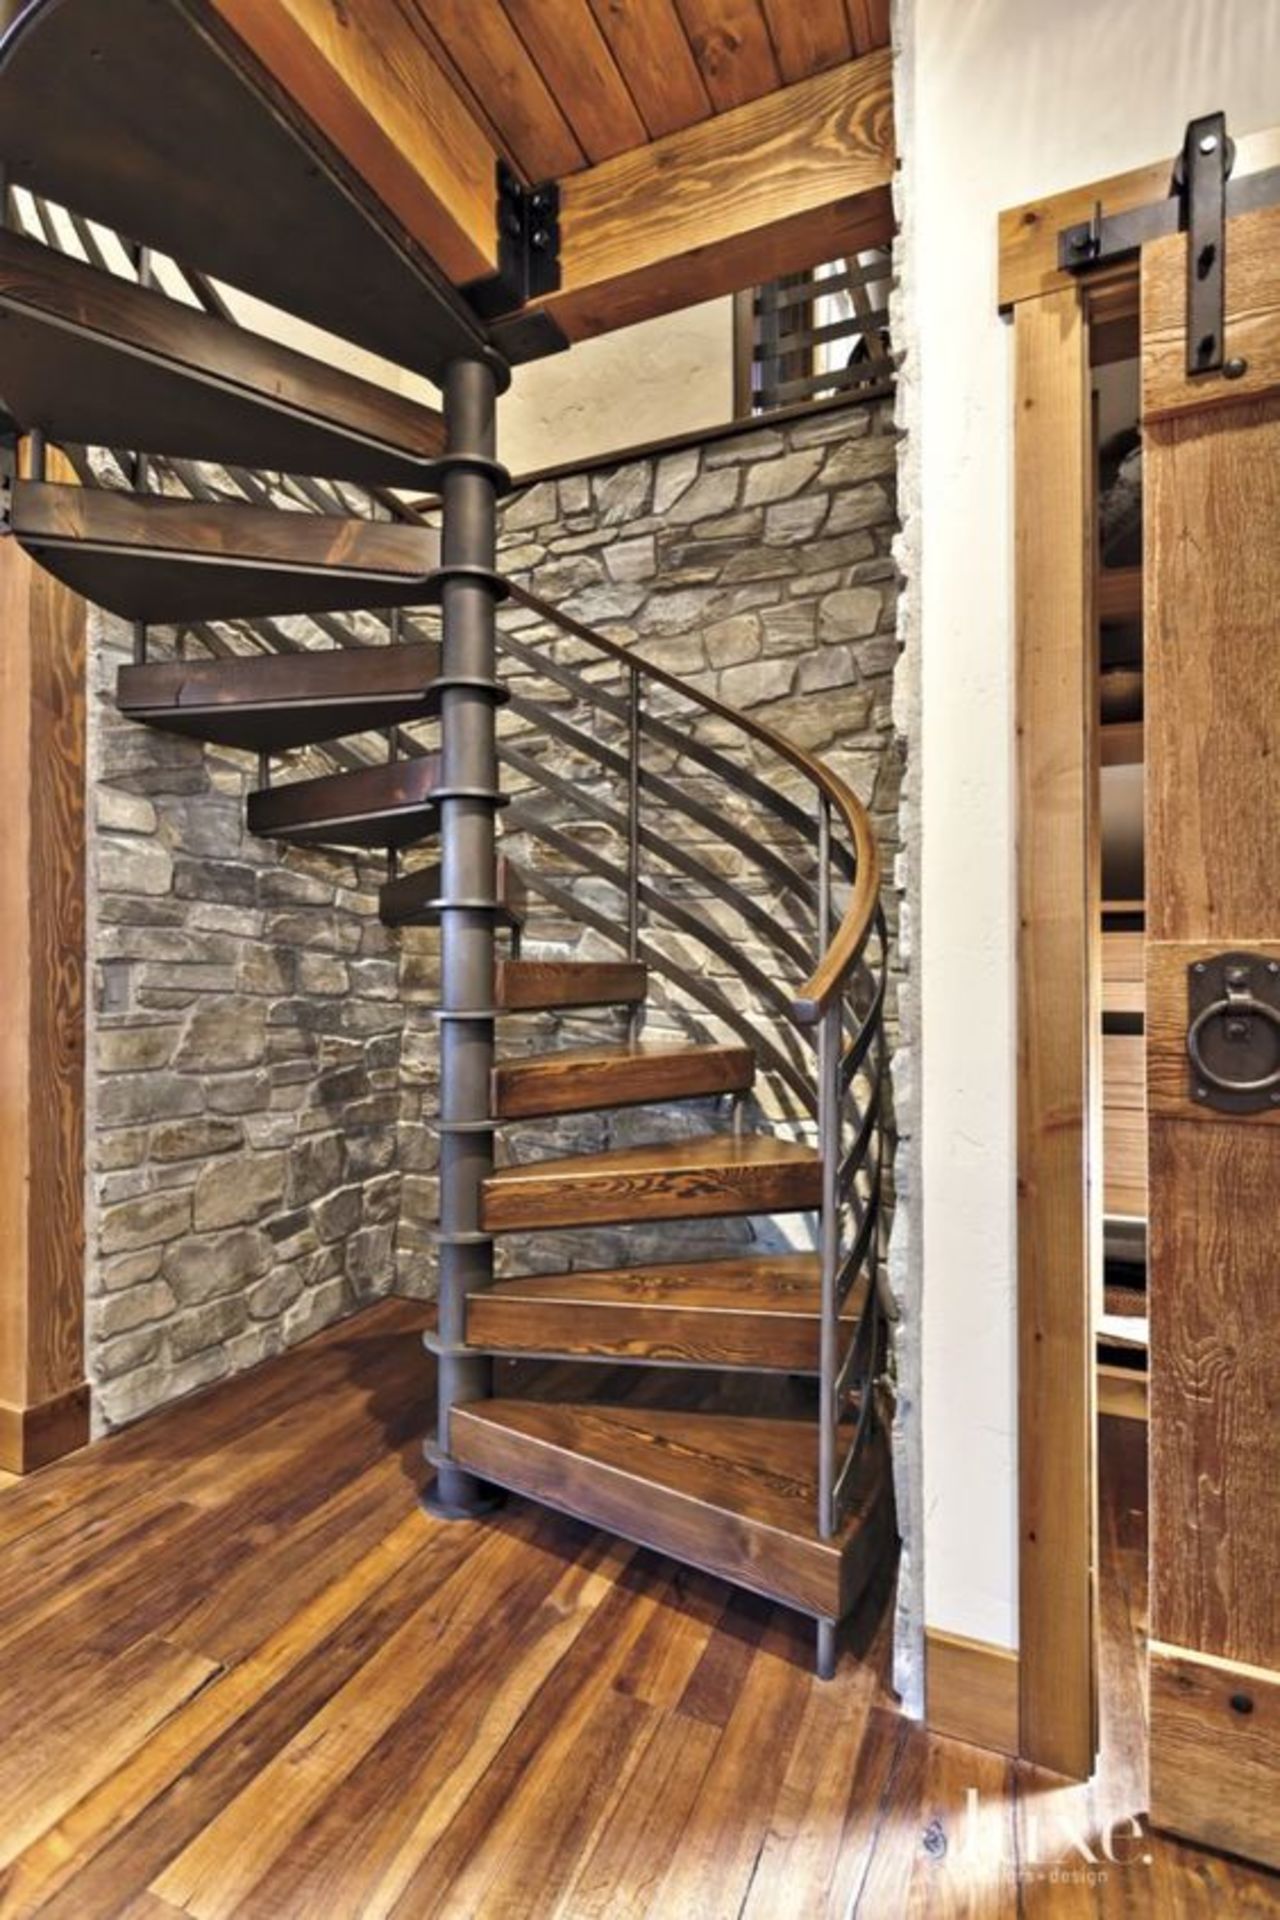 #Staircase Saturday -- A great looking winding staircase in this San Juan Islands retreat. http://ow.ly/2BEV3010U9e https://t.co/ApiX1rOwcN